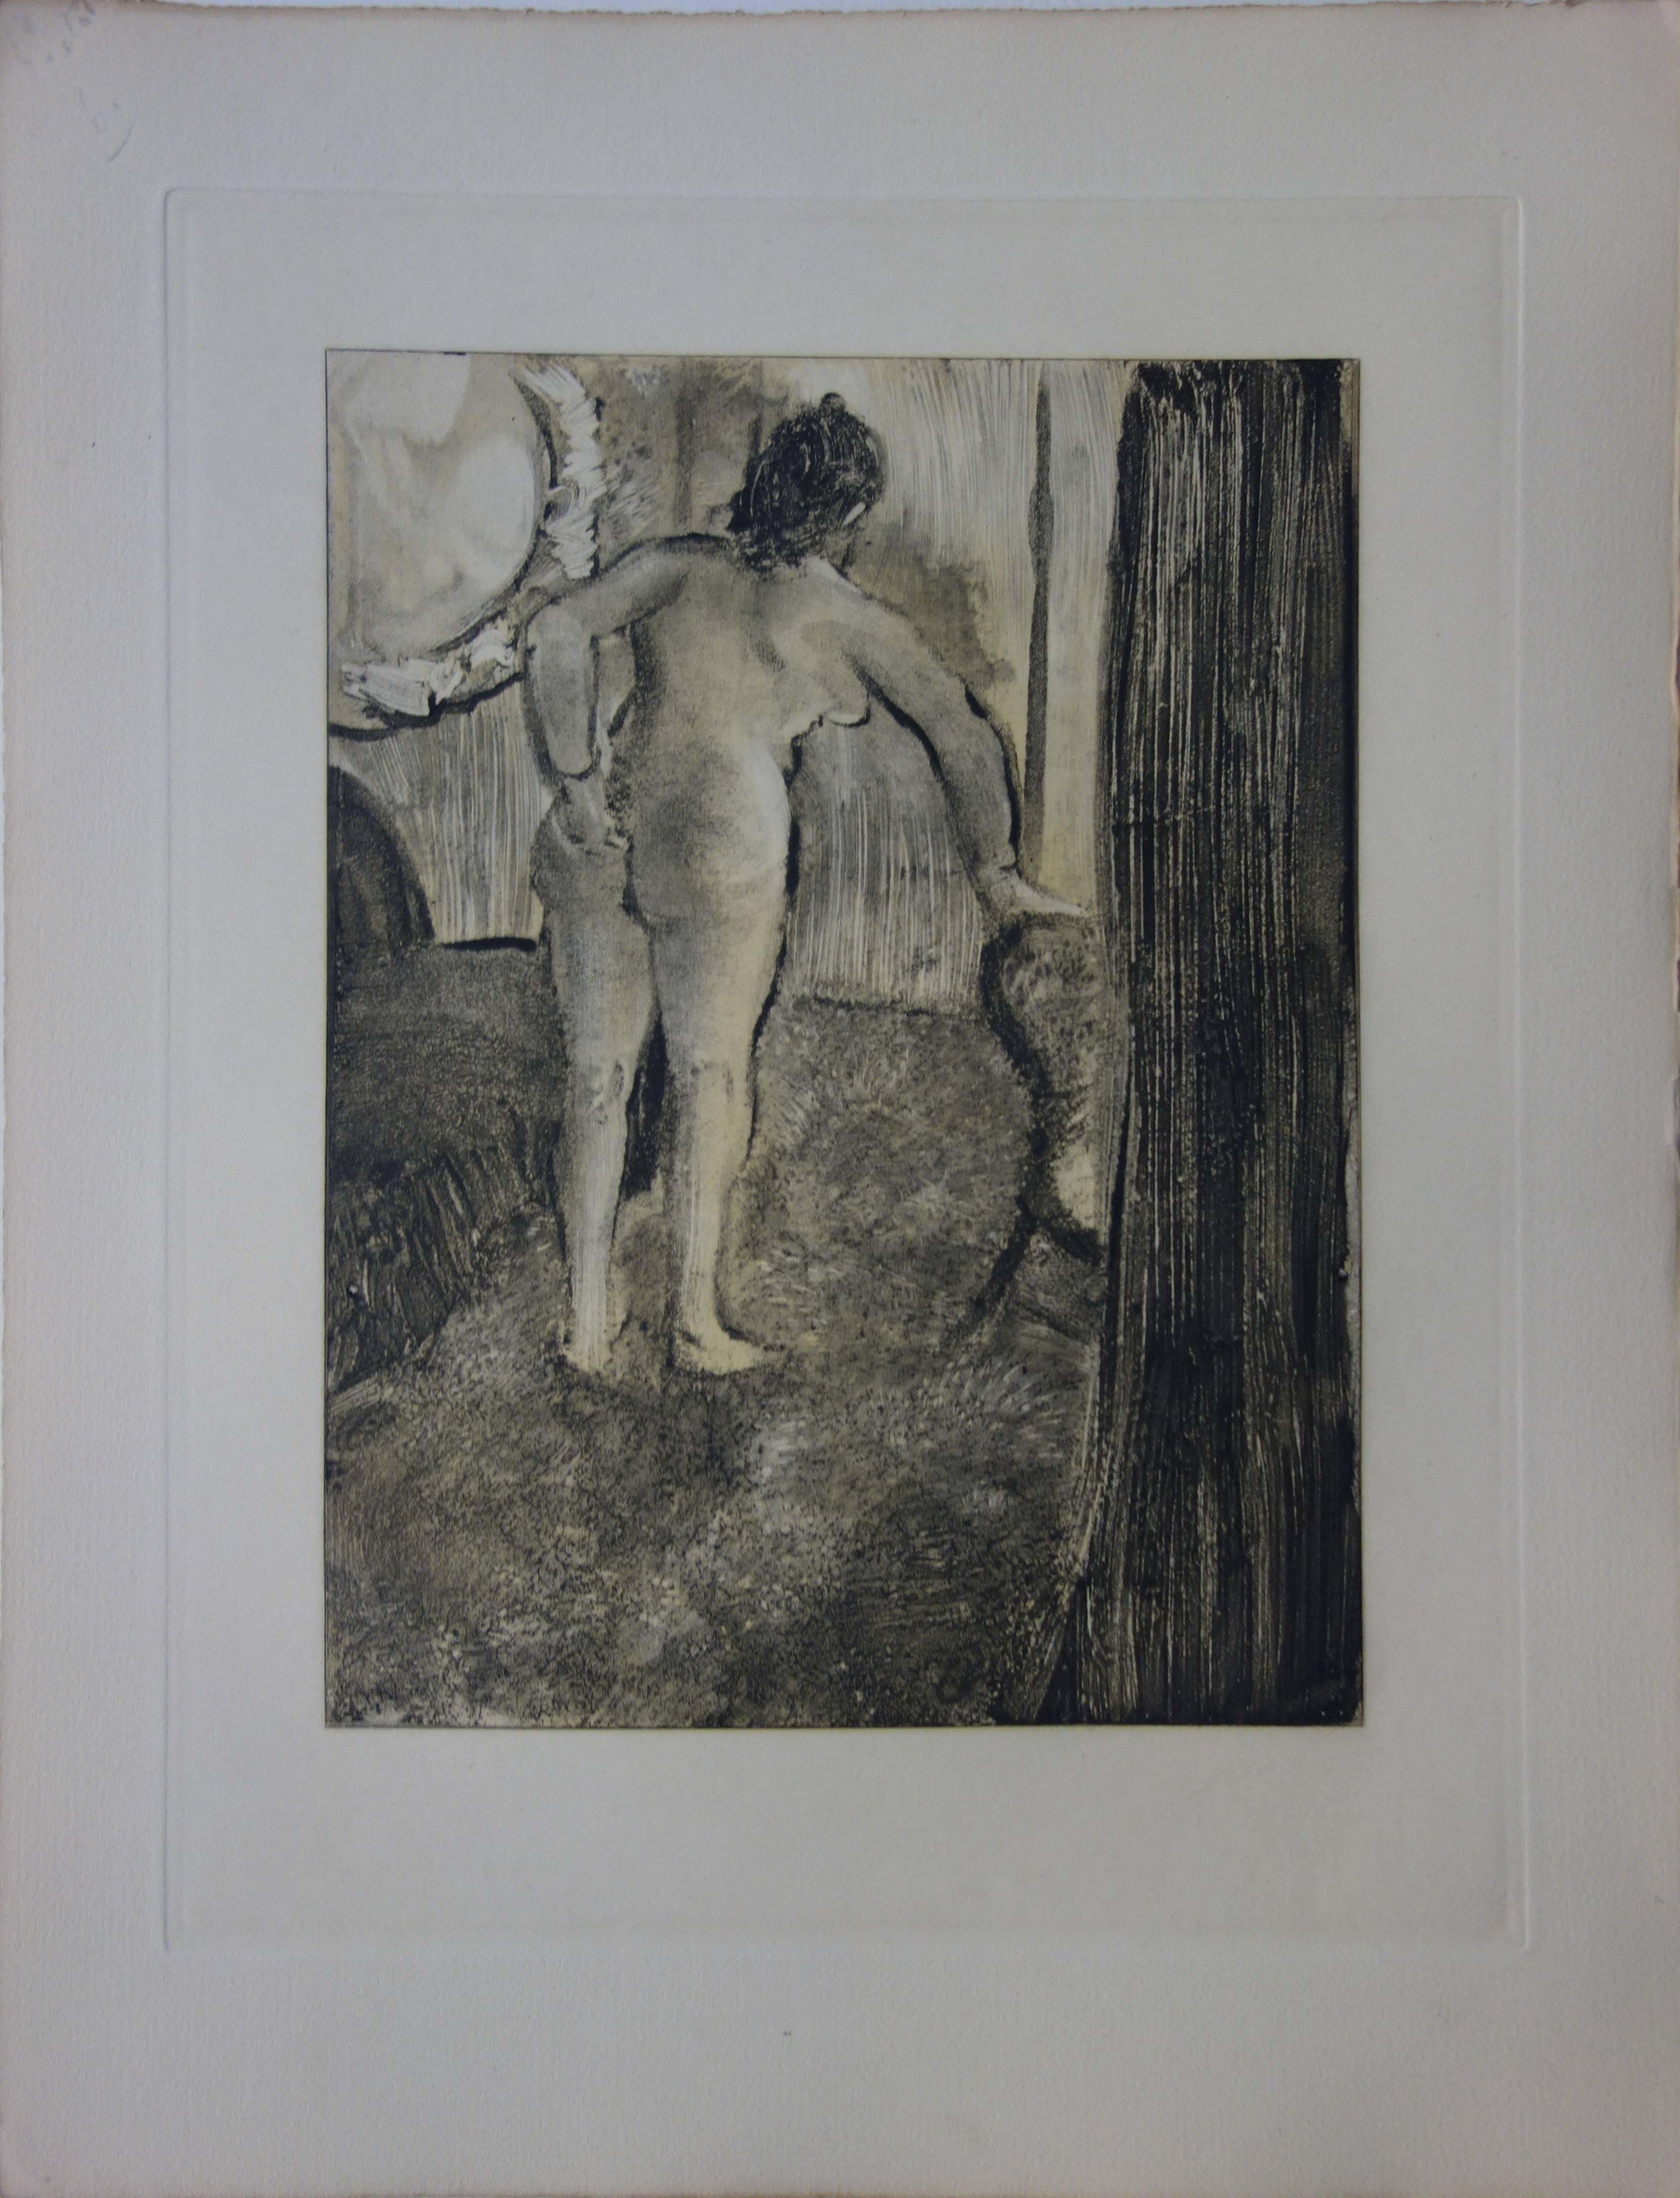 Whorehouse Scene : Waking Up After a Long Love Night - Etching - Print by (after) Edgar Degas